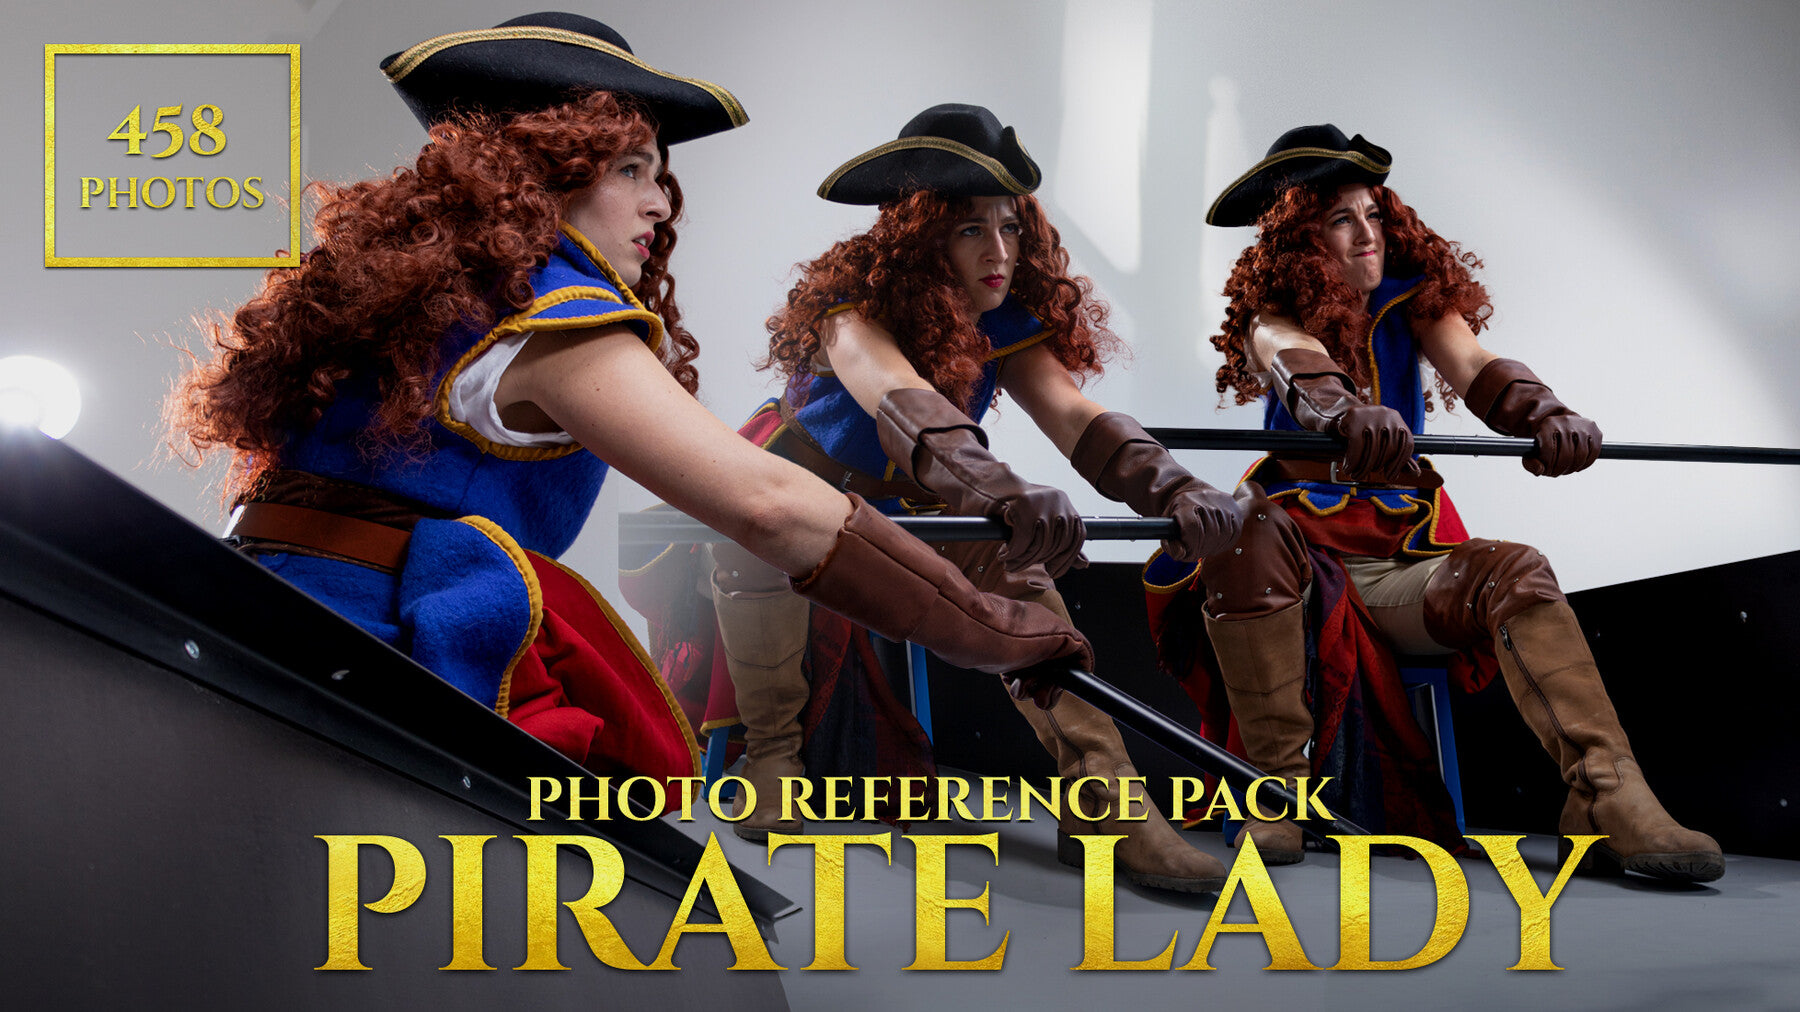 Pirate Lady - Photo Reference Pack For Artists 458 JPEGs